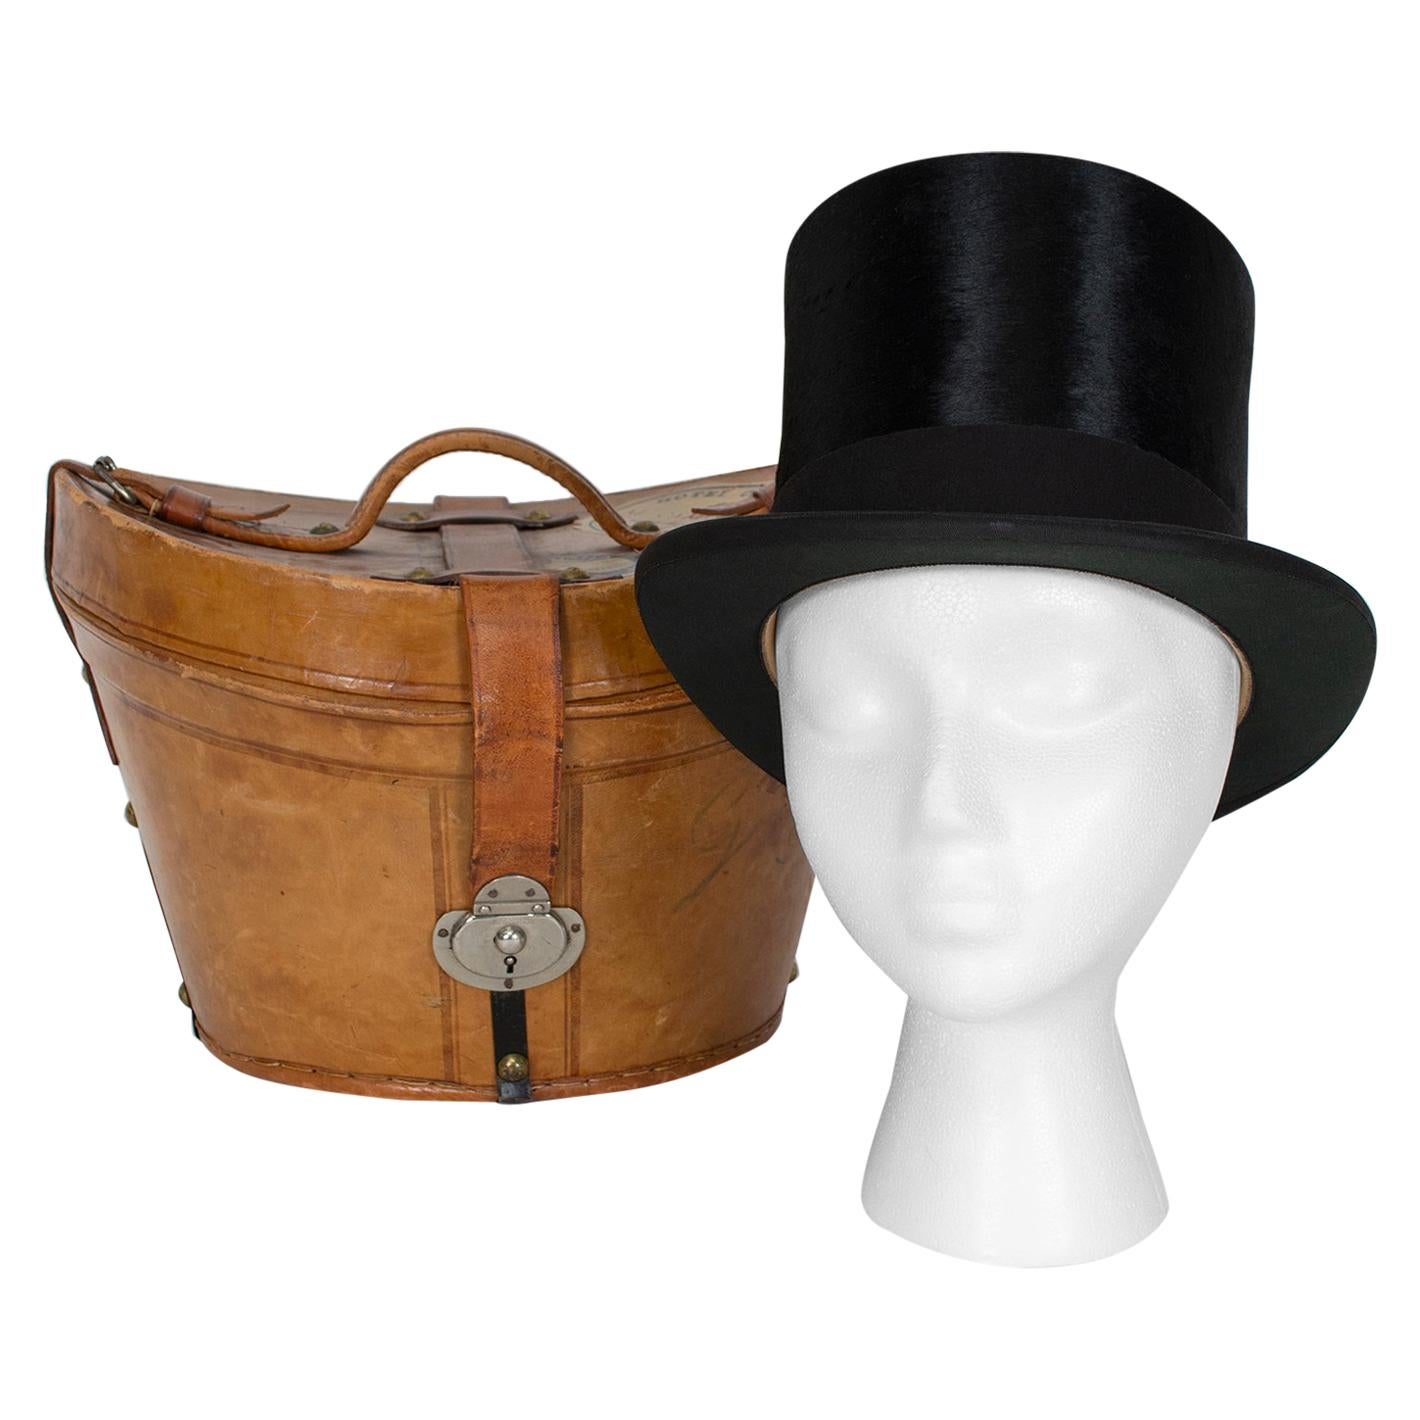 Harrod's Beaver Fur Top Hat and Travel Case with Transport Stickers, 1910